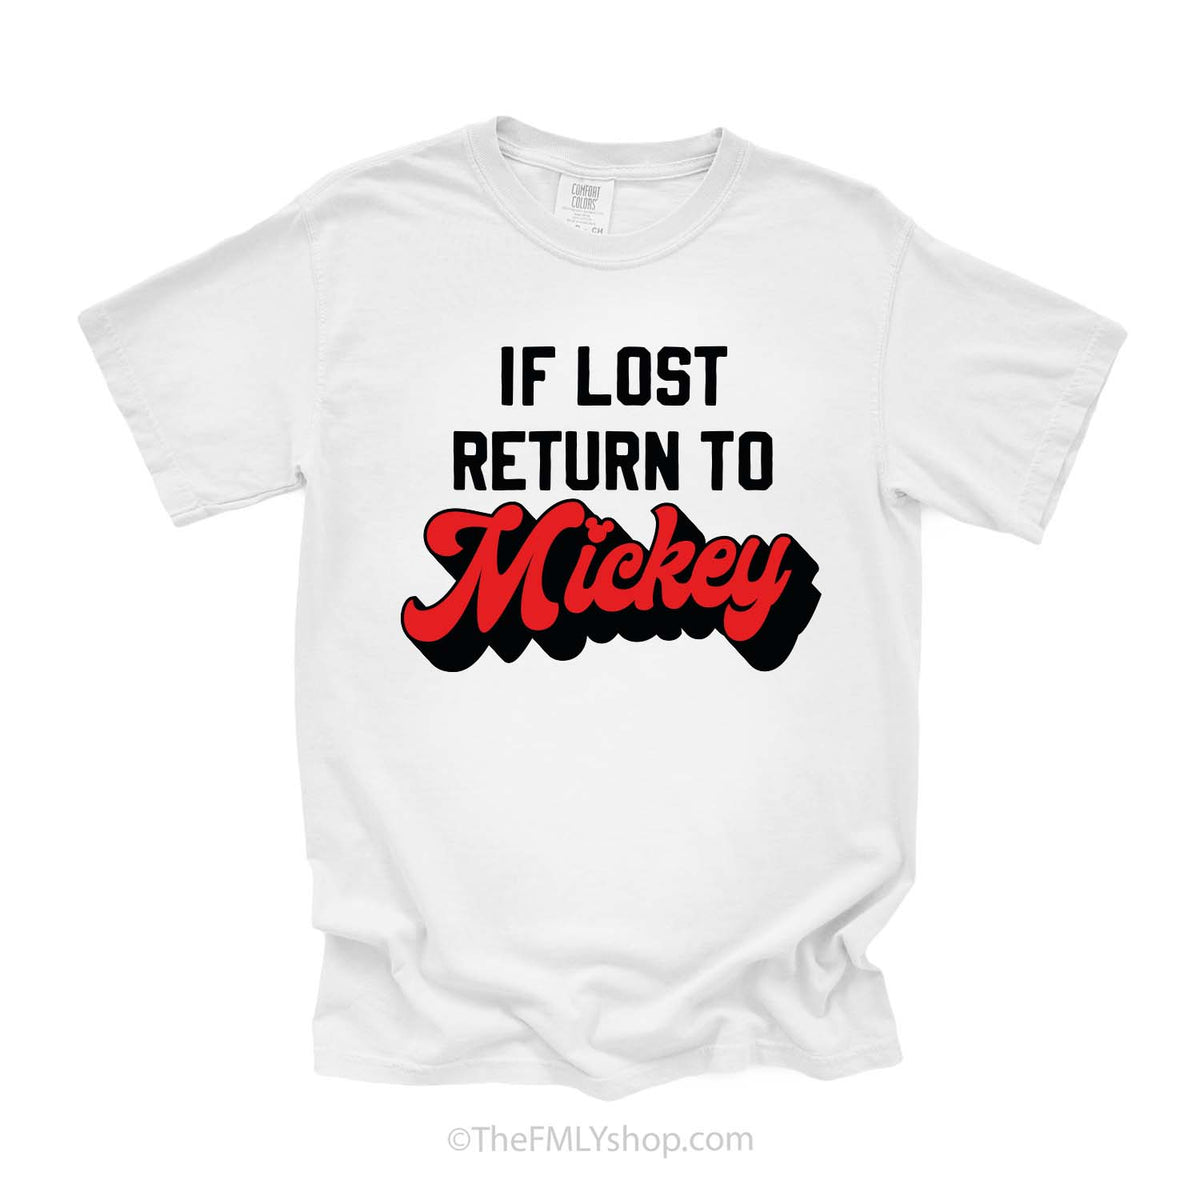 If Lost Return To Mickey Tee